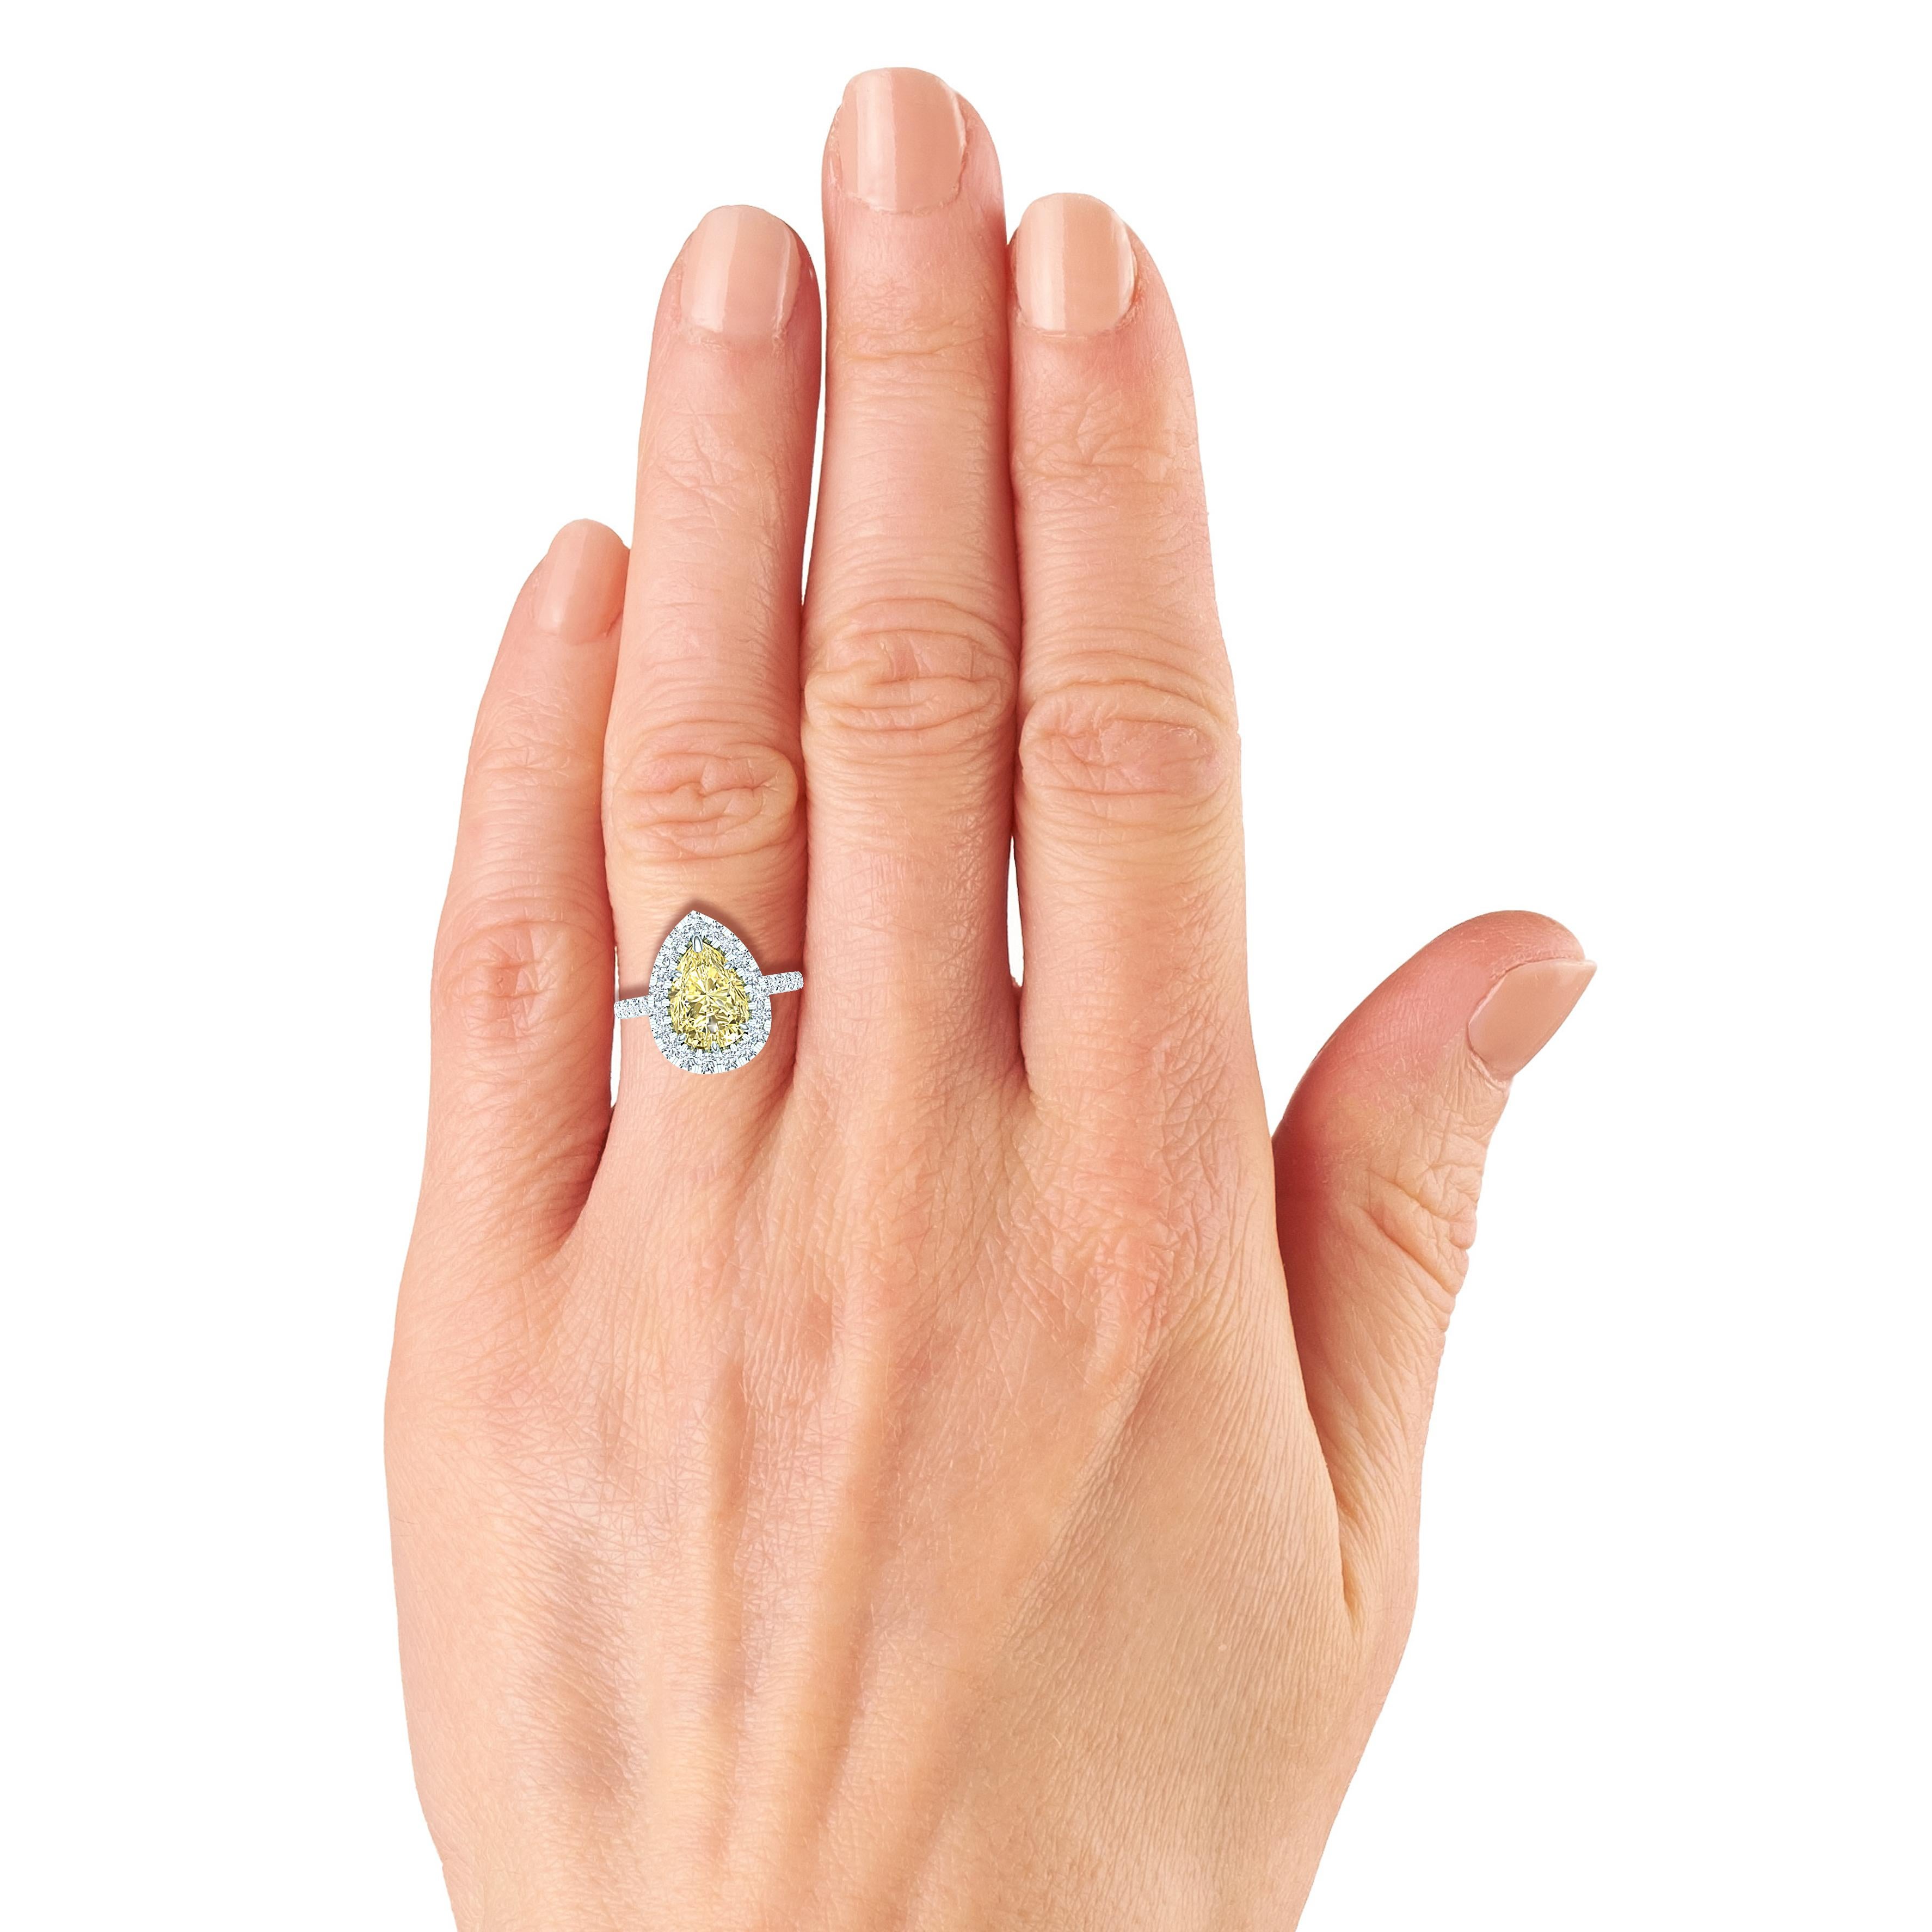 Women's or Men's 2 Carat Pear Shape Yellow Diamond Engagement Ring For Sale